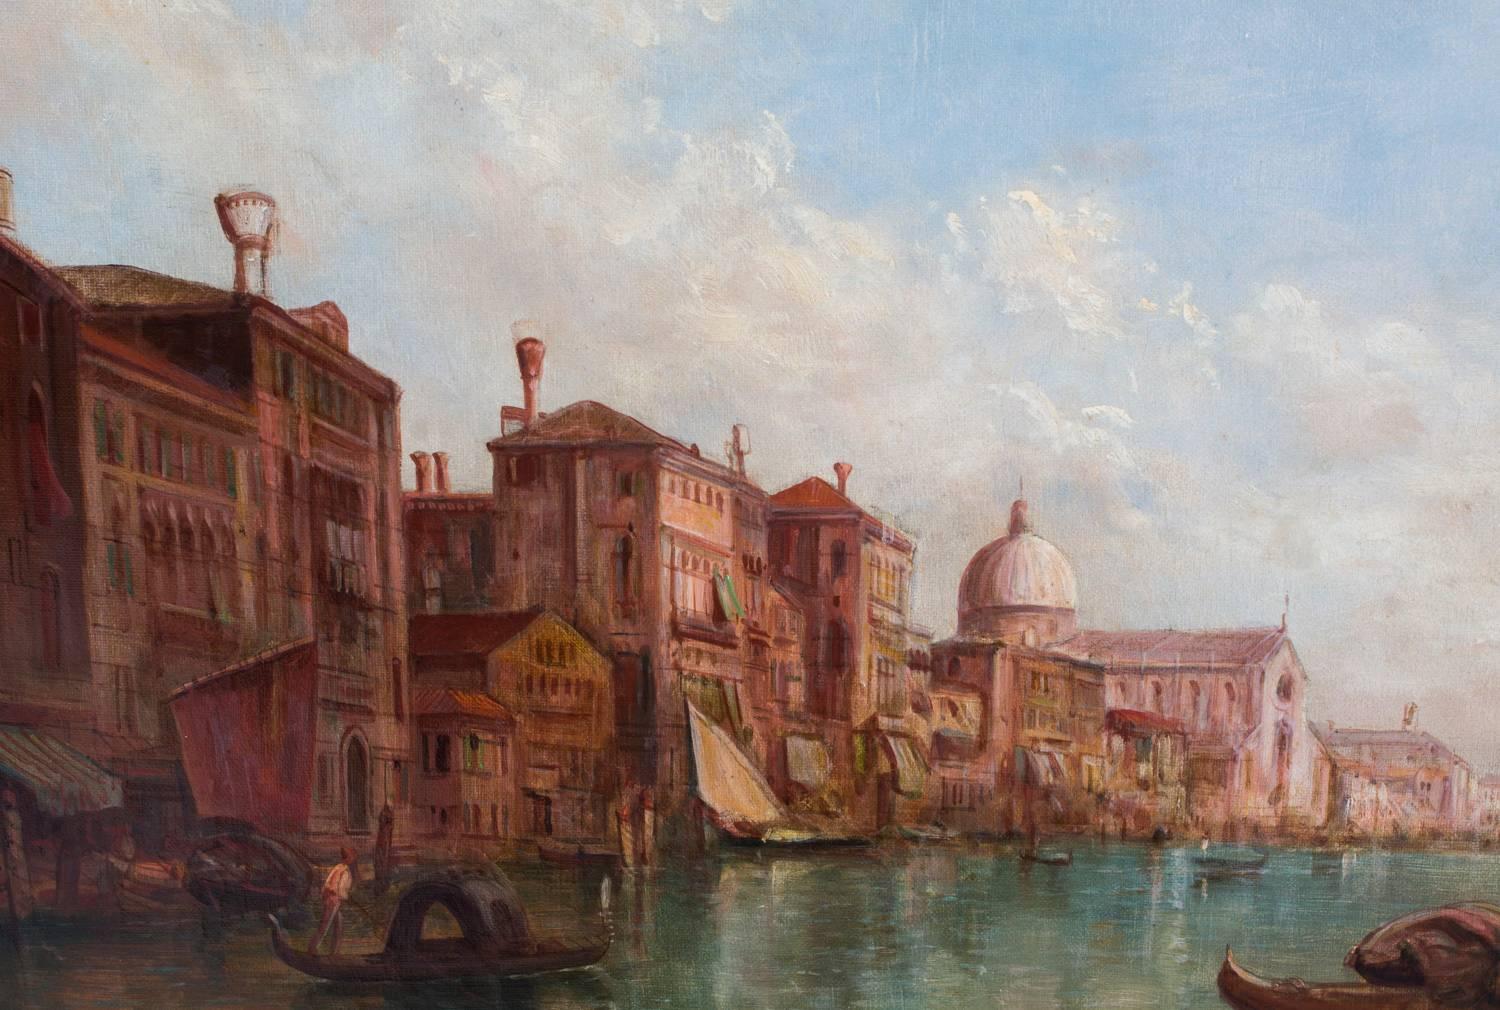 British Antique Oil Painting Grand Canal Venice Alfred Pollentine, 19th Century